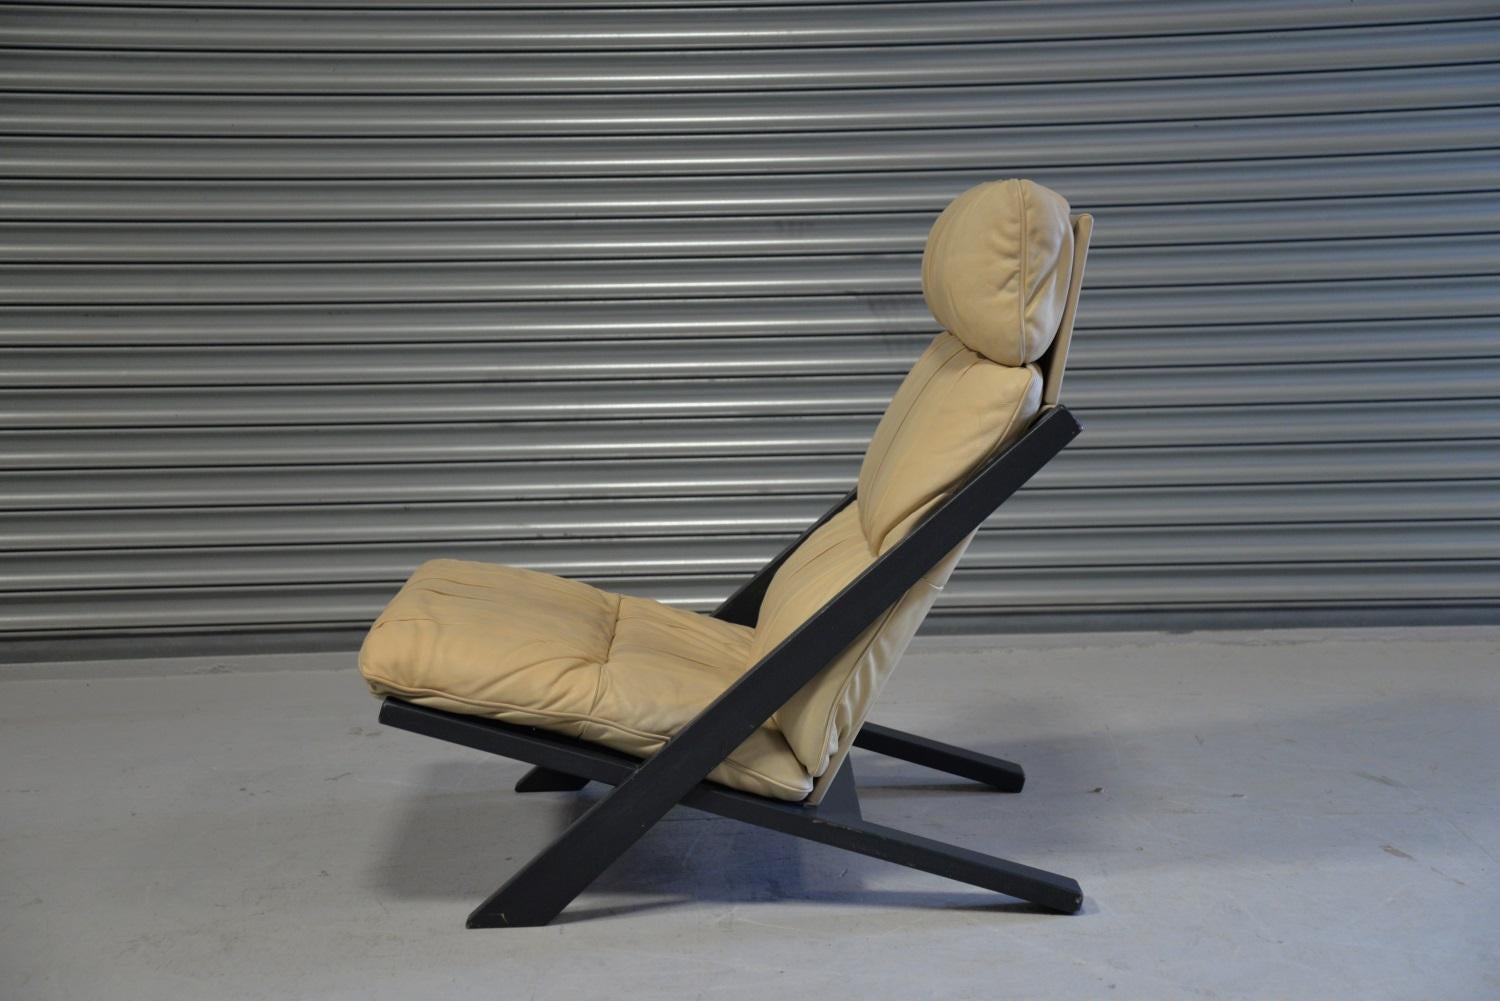 Discounted airfreight for our US and International customers ( from 2 weeks door to door)

We are delighted to bring to you an original patchwork leather lounge chair by Ueli Bergère for De Sede of Switzerland, 1970s. Standing on a black lacquered